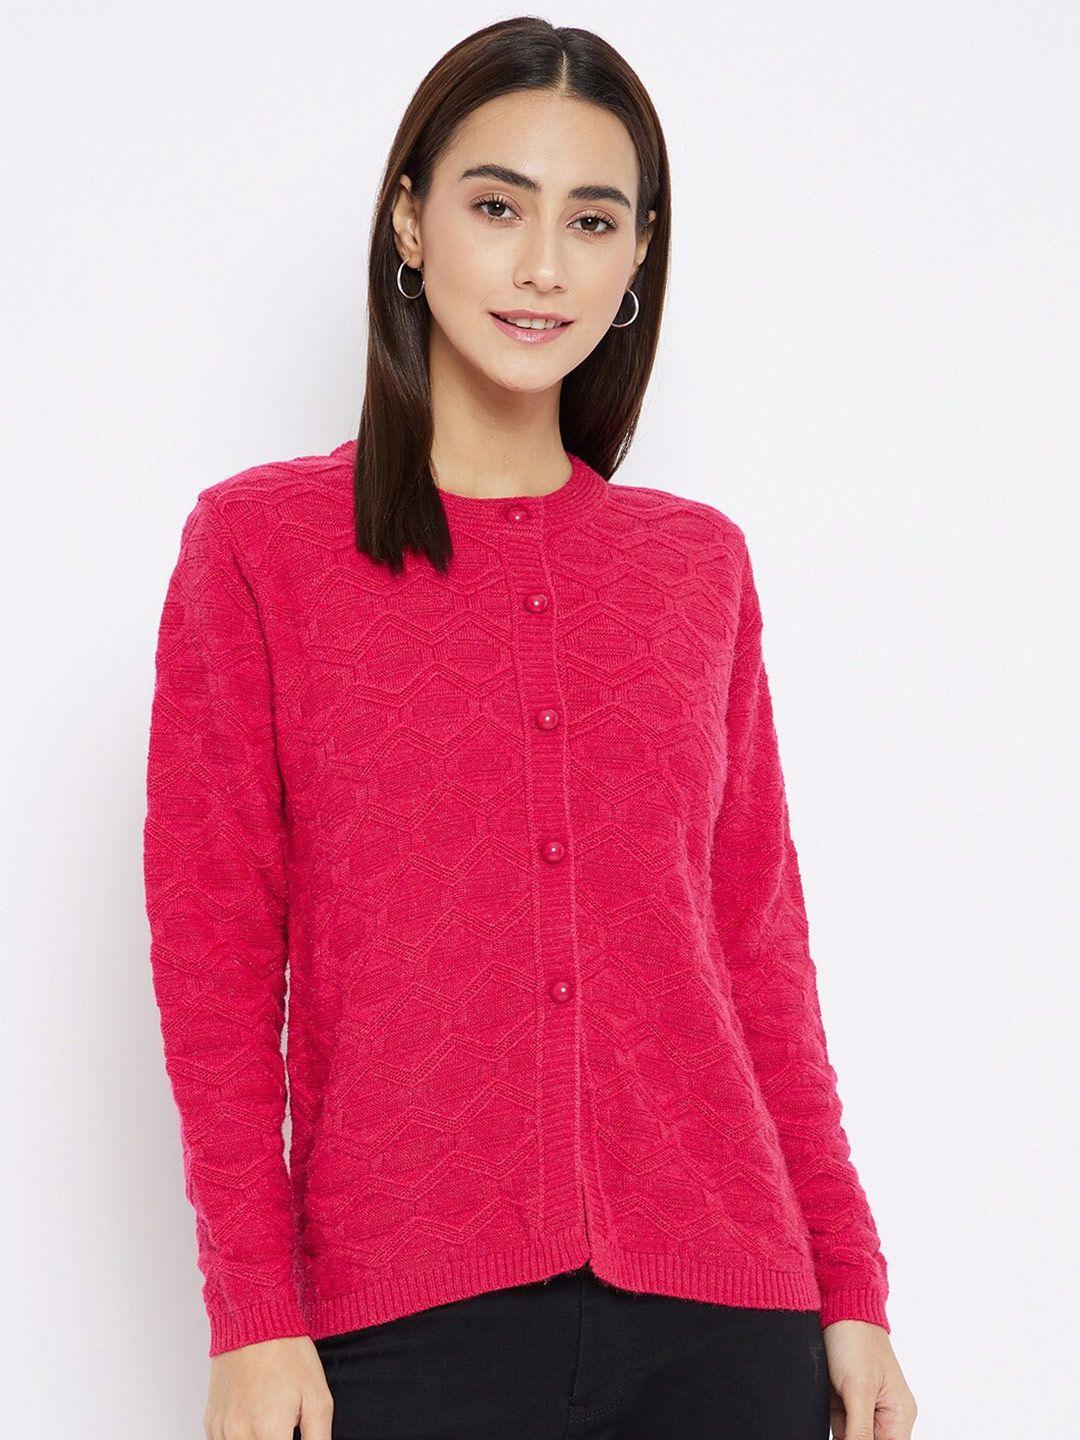 clapton cable knit woollen front-open sweaters with applique detail